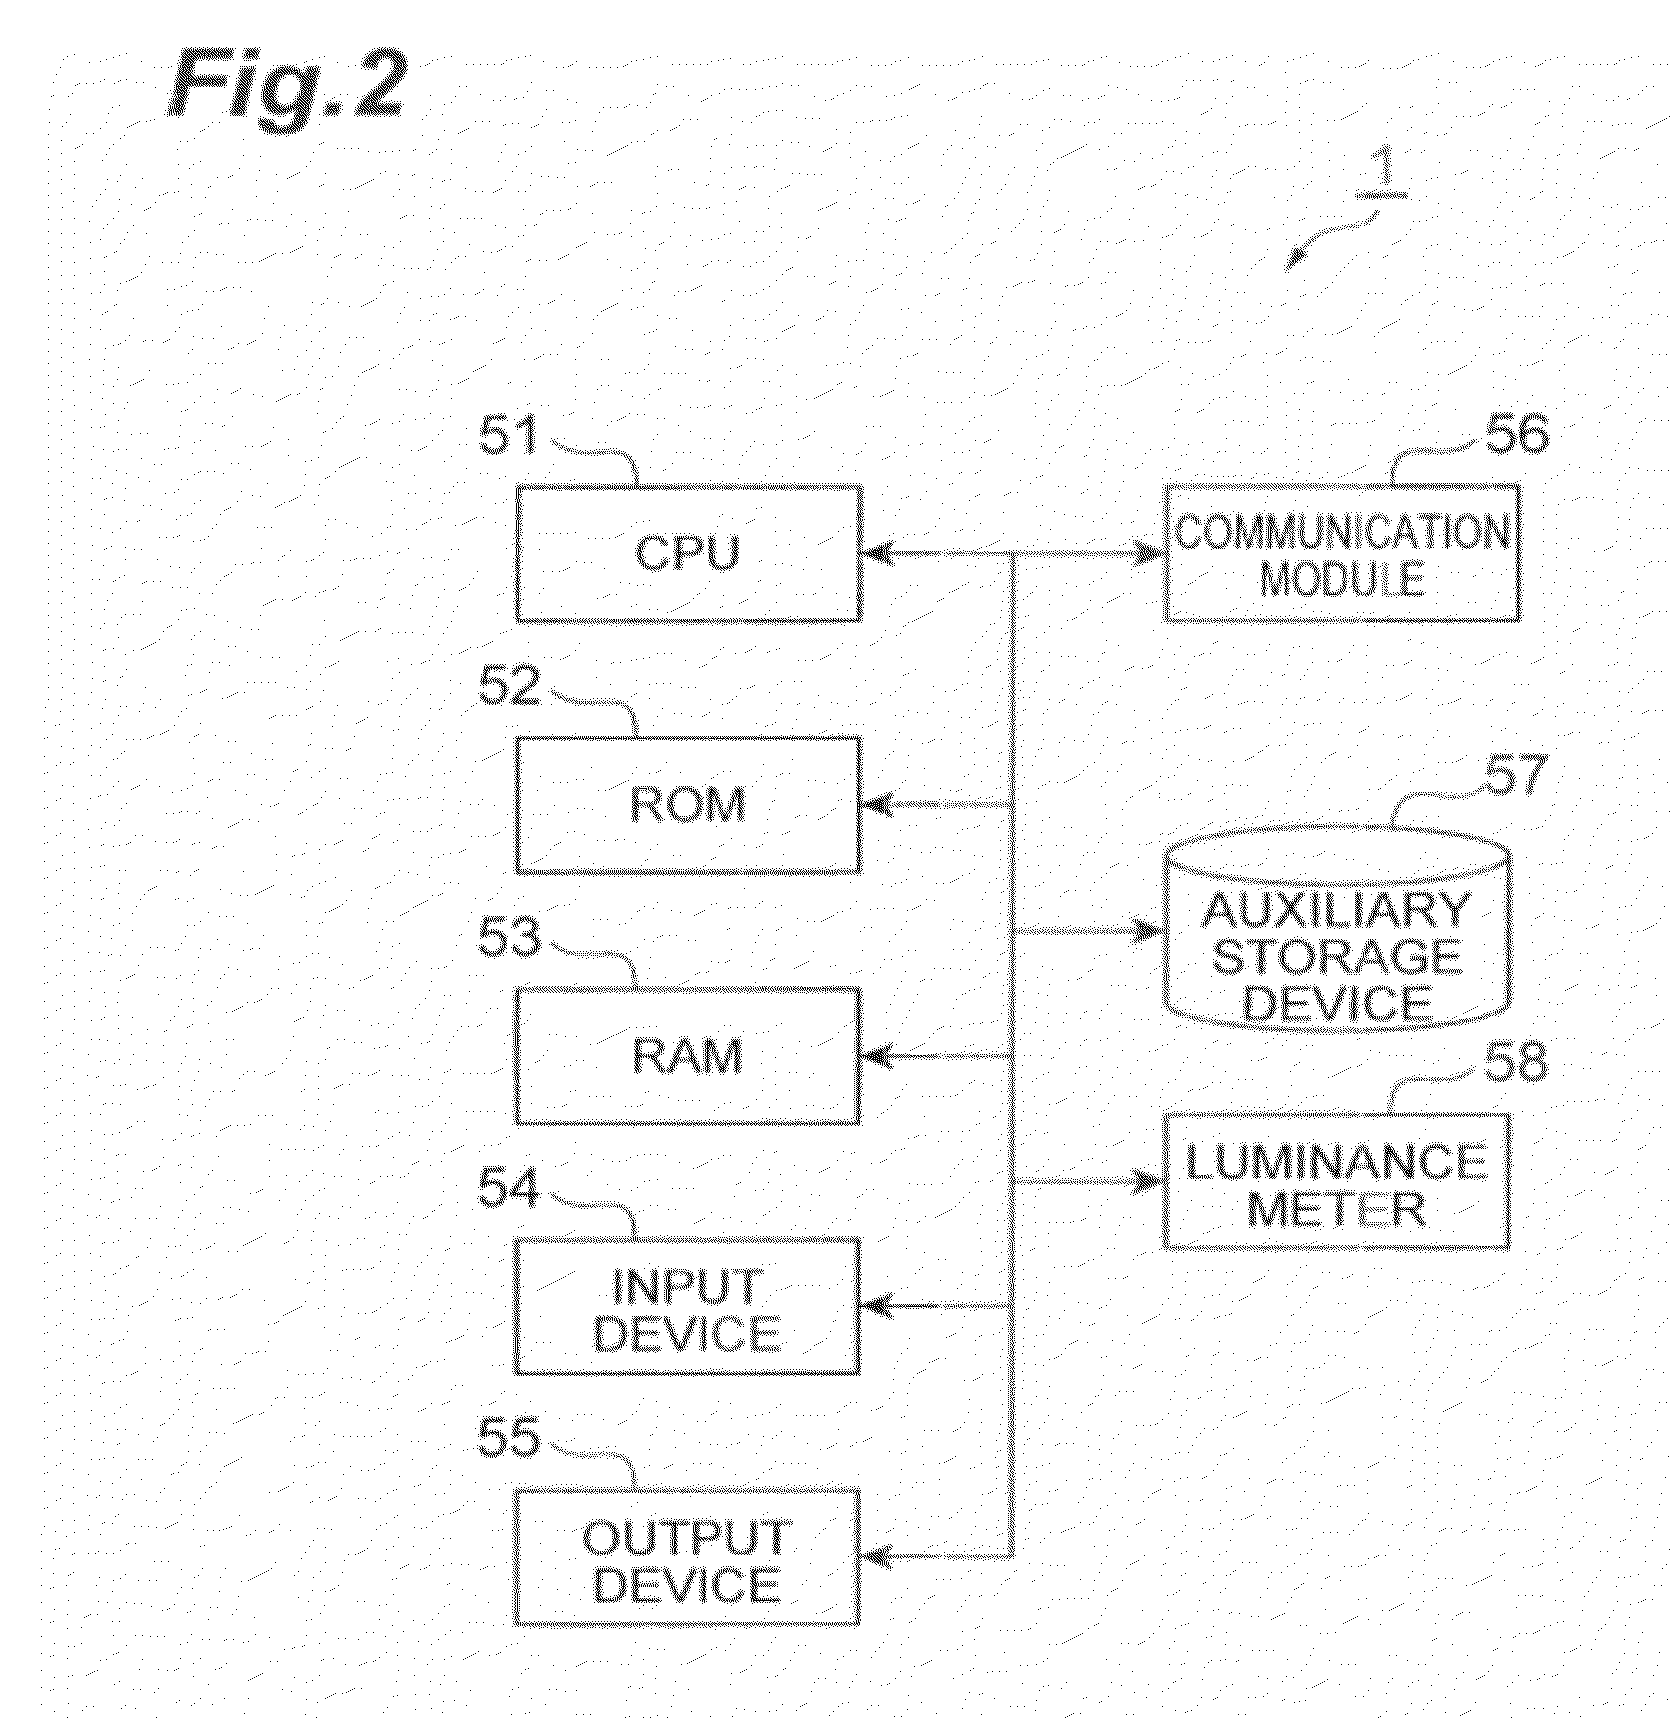 Apparatus for evaluating optical properties of three-dimensional display, and method for evaluating optical properties of three-dimensional display